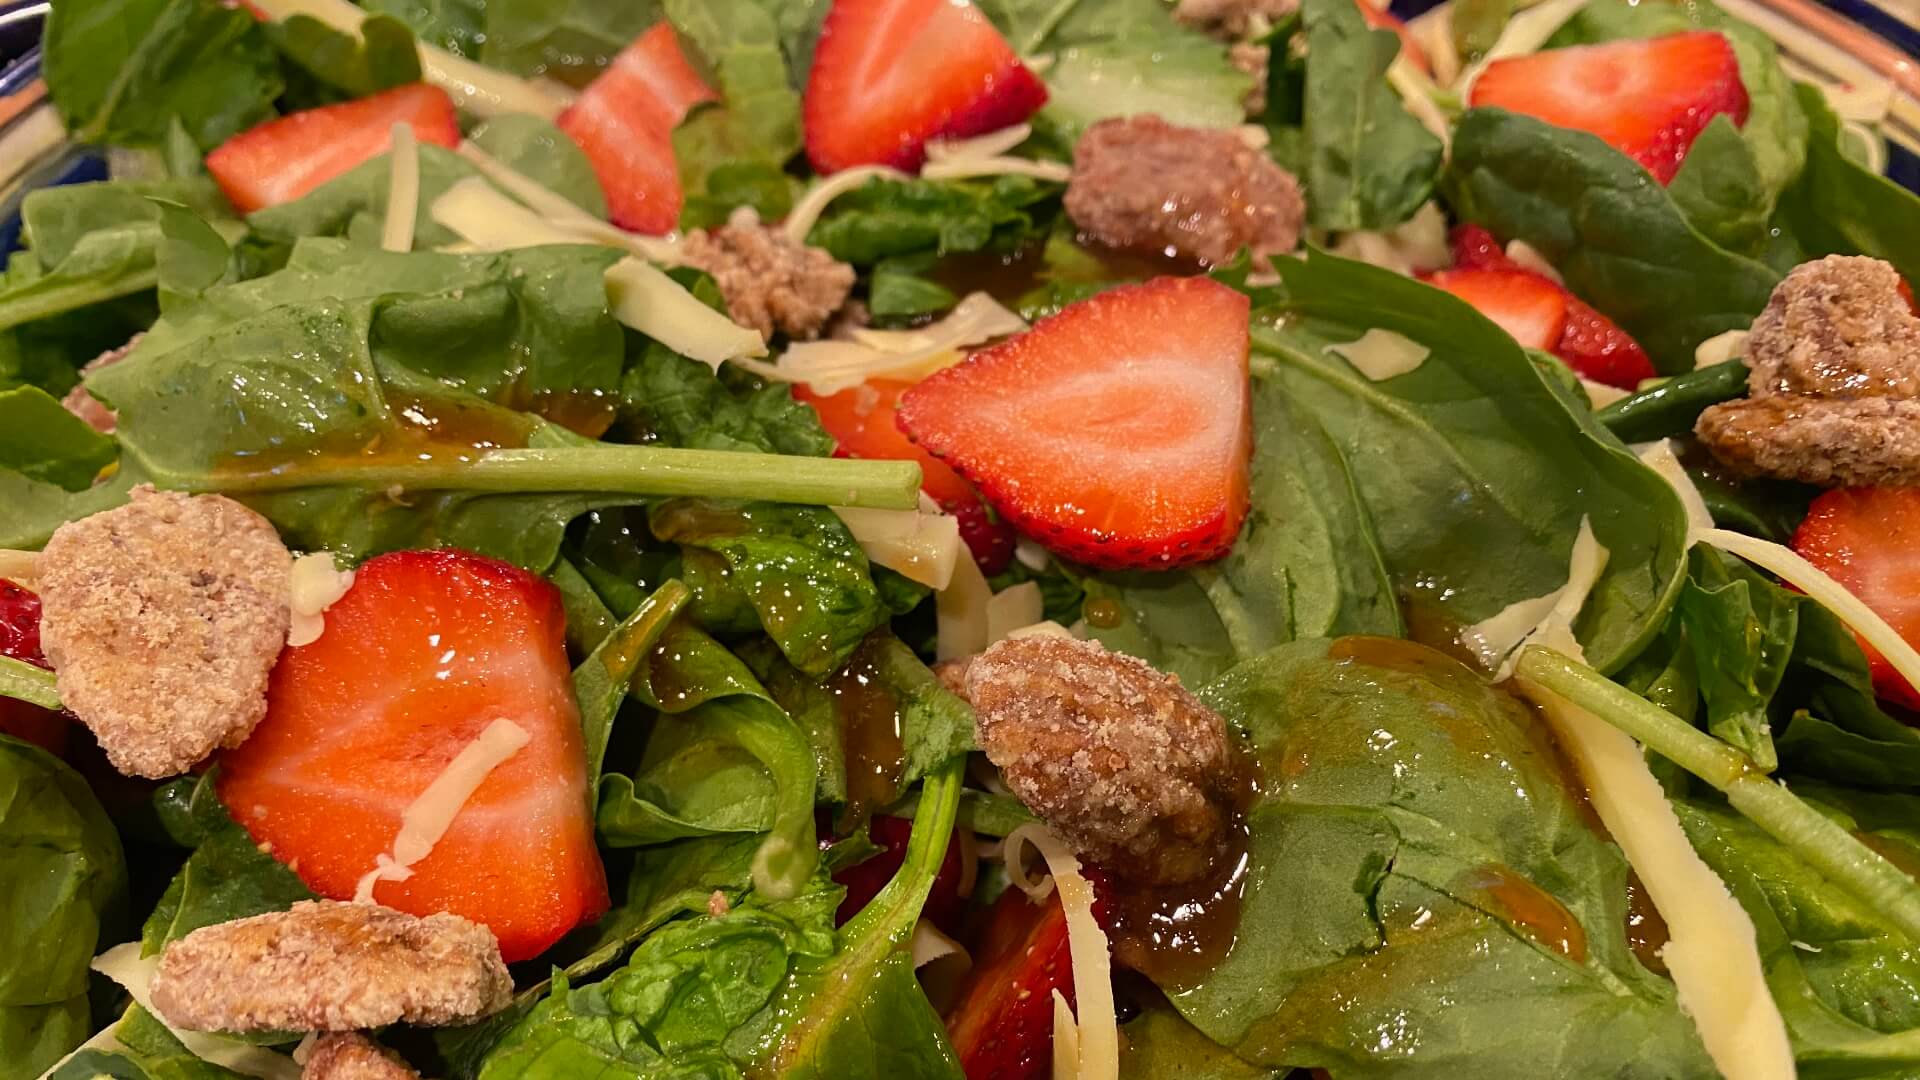 a fresh salad with green spinach leaves, sliced red strawberries, slivers of monterey jack cheese, and sugar-cinnamon coated pecans.